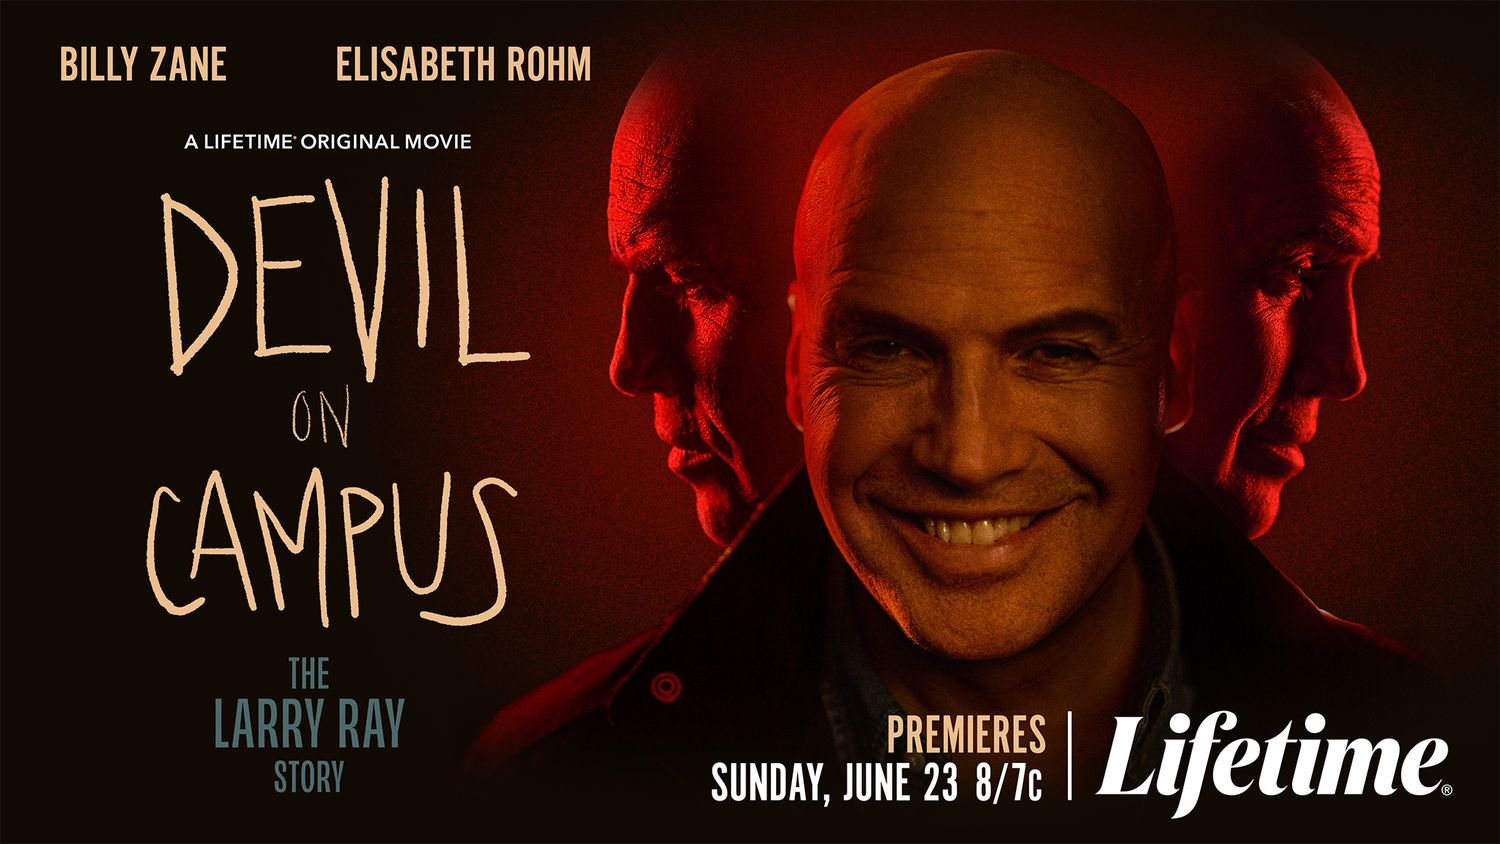 Billy Zane in 'Devil on Campus: The Larry Ray Story'